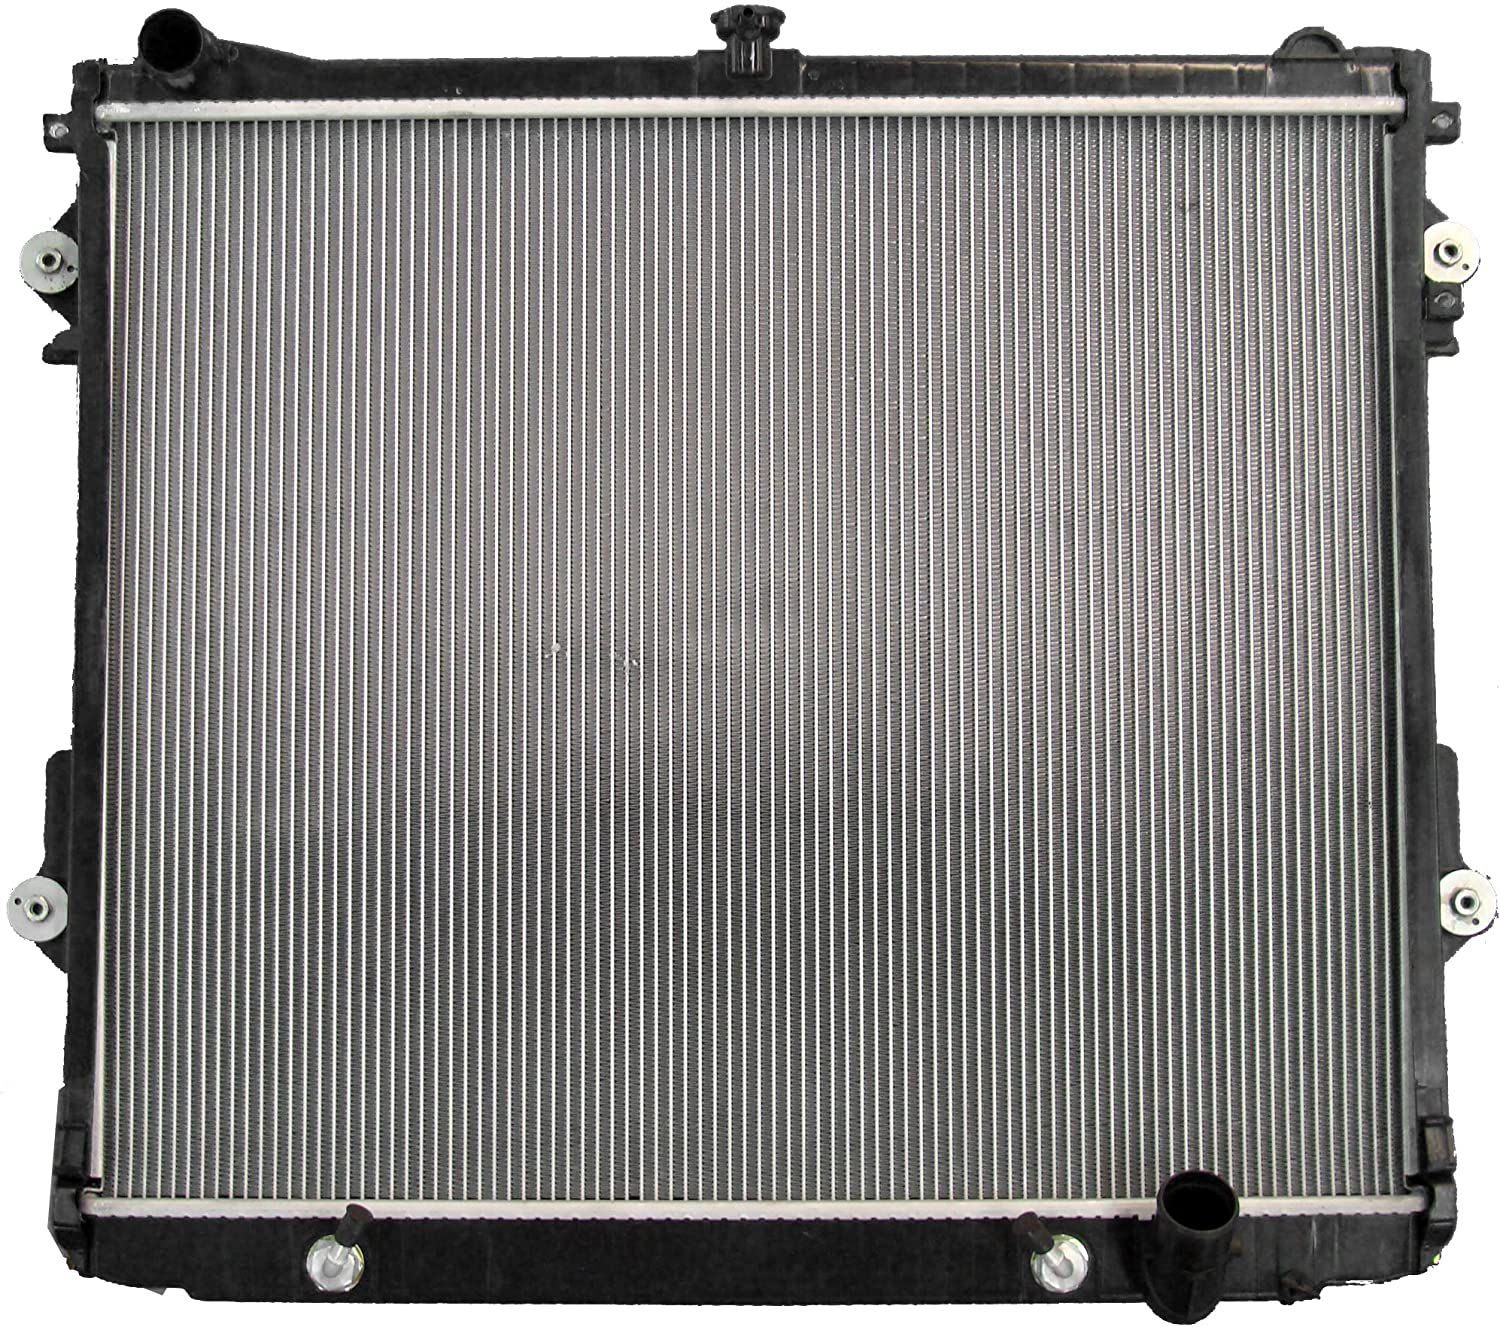 ECCPP Radiator 13080 Replacement fit for 2008-2015 for TOYOTA Land Cruiser Base/VX Sport Utility 4-Door 5.7L for LEXUS LX570 Base Sport Utility 4-Door 5.7L